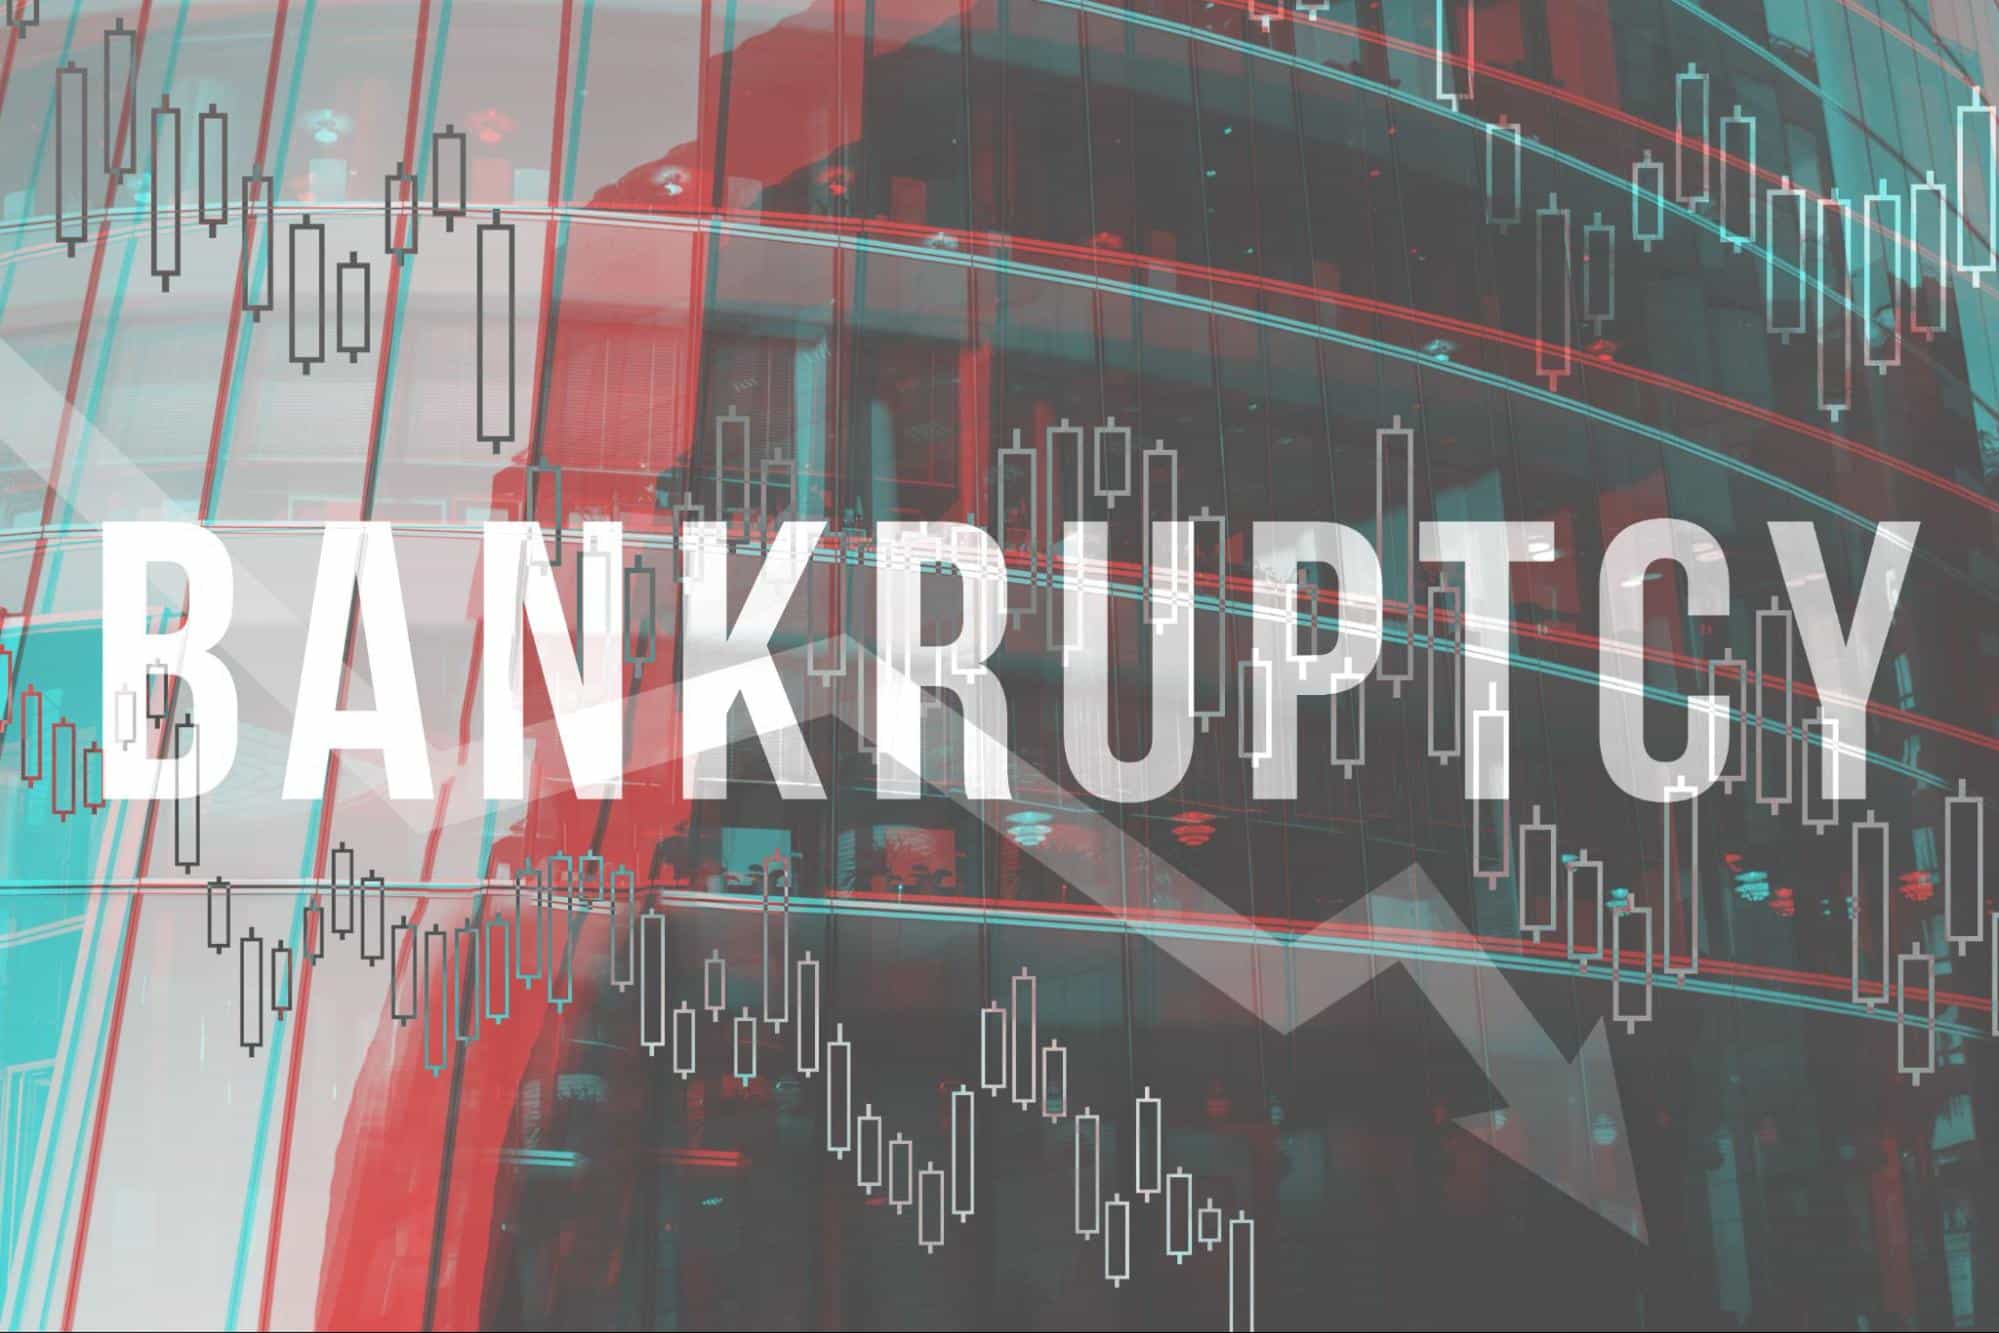 bankruptcy text on background of modern building